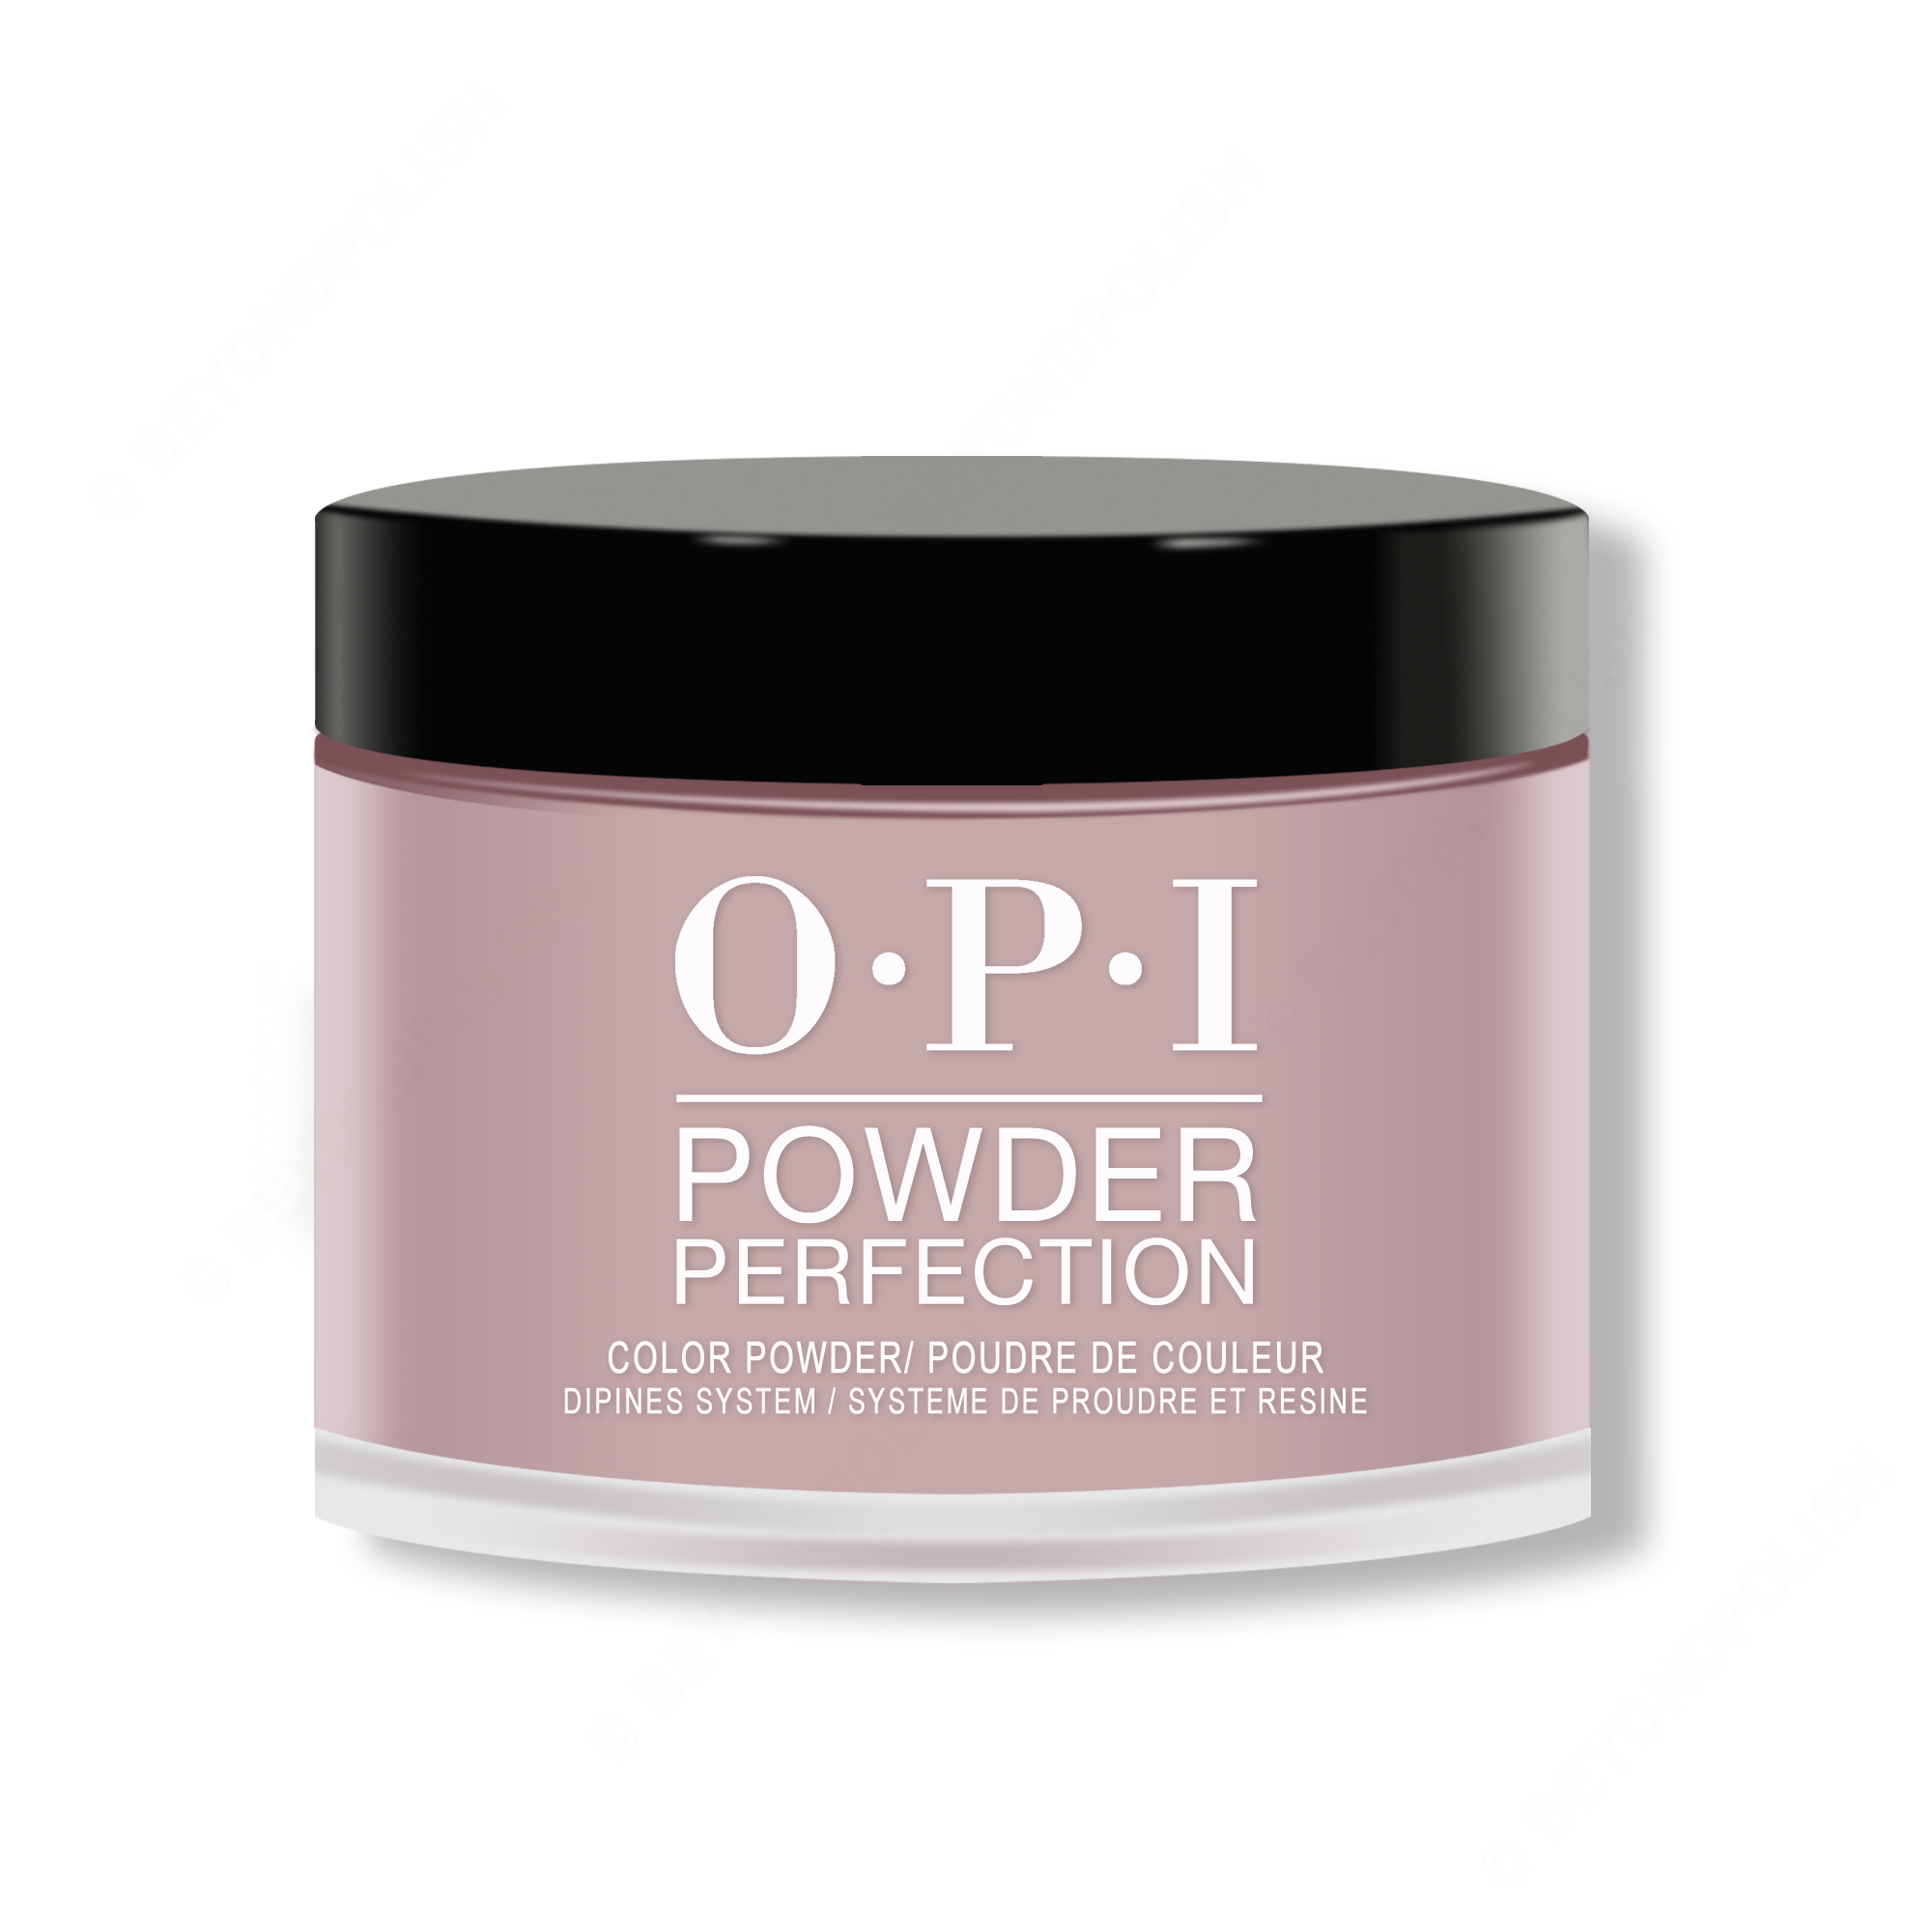 OPI Dip Powder Perf 1.5oz #F15 - You Dont Know Jacques!